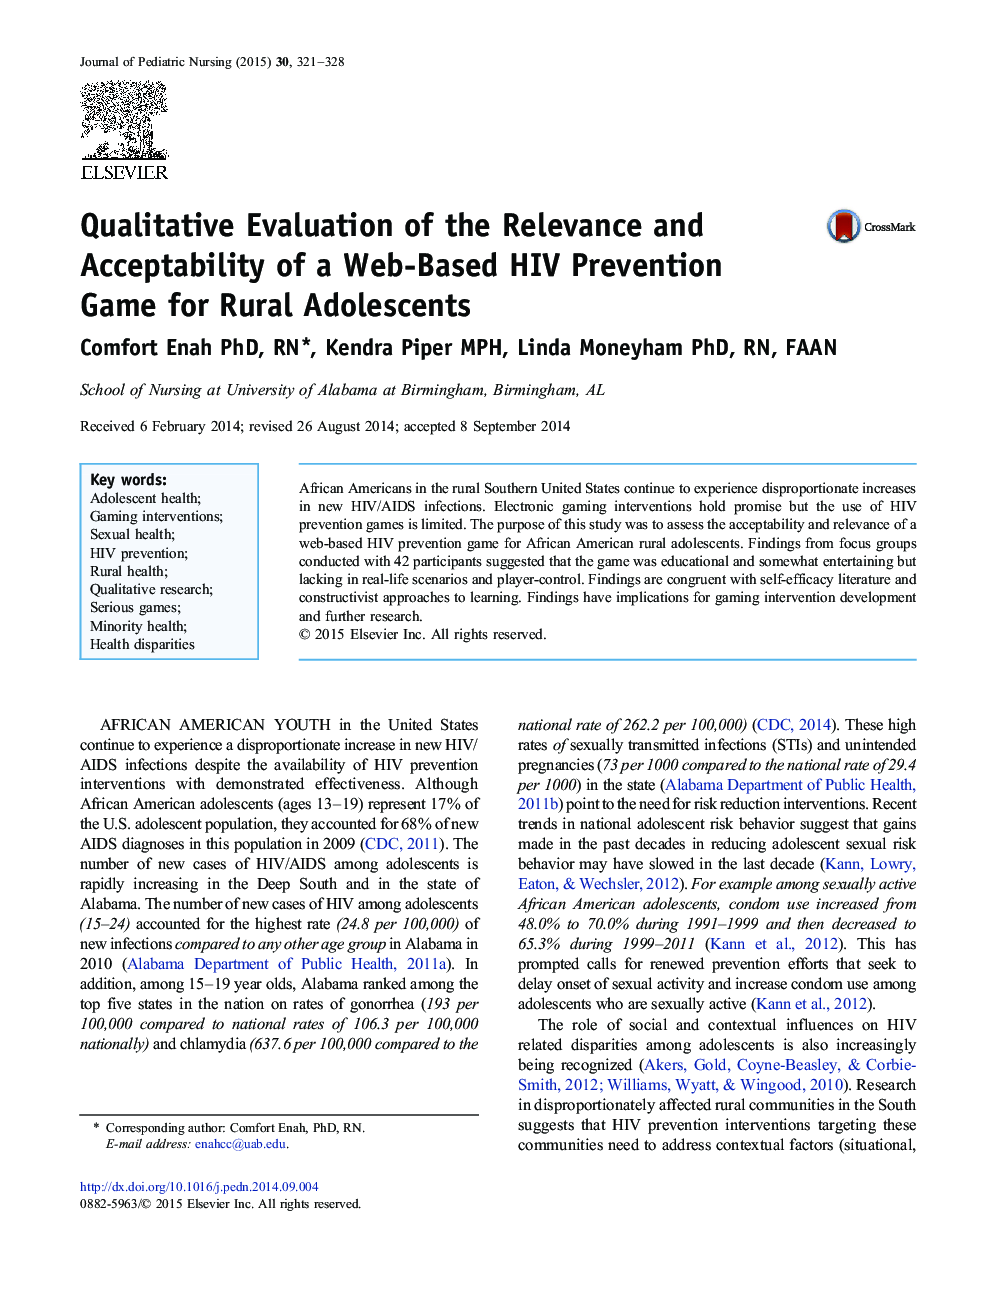 Qualitative Evaluation of the Relevance and Acceptability of a Web-Based HIV Prevention Game for Rural Adolescents